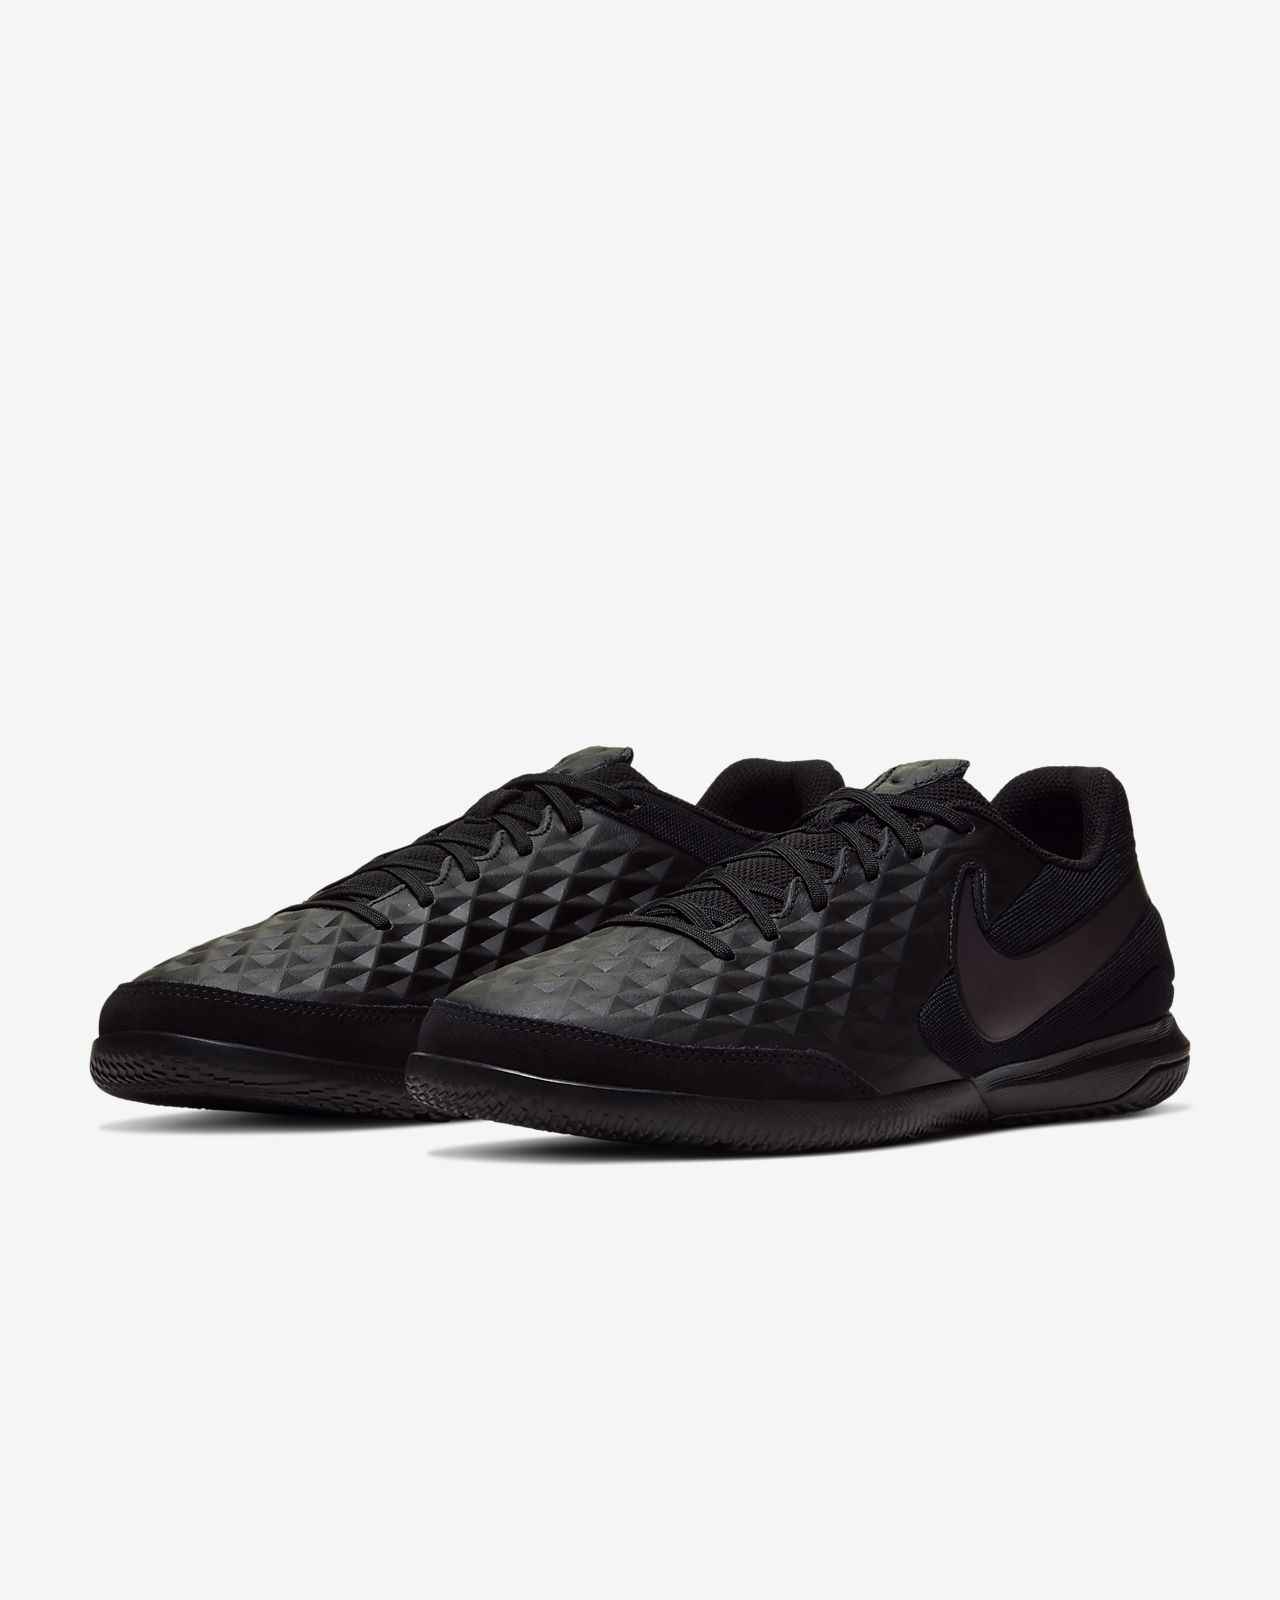 Nike Tiempo Legend VIII Club TF Black buy and offers on.